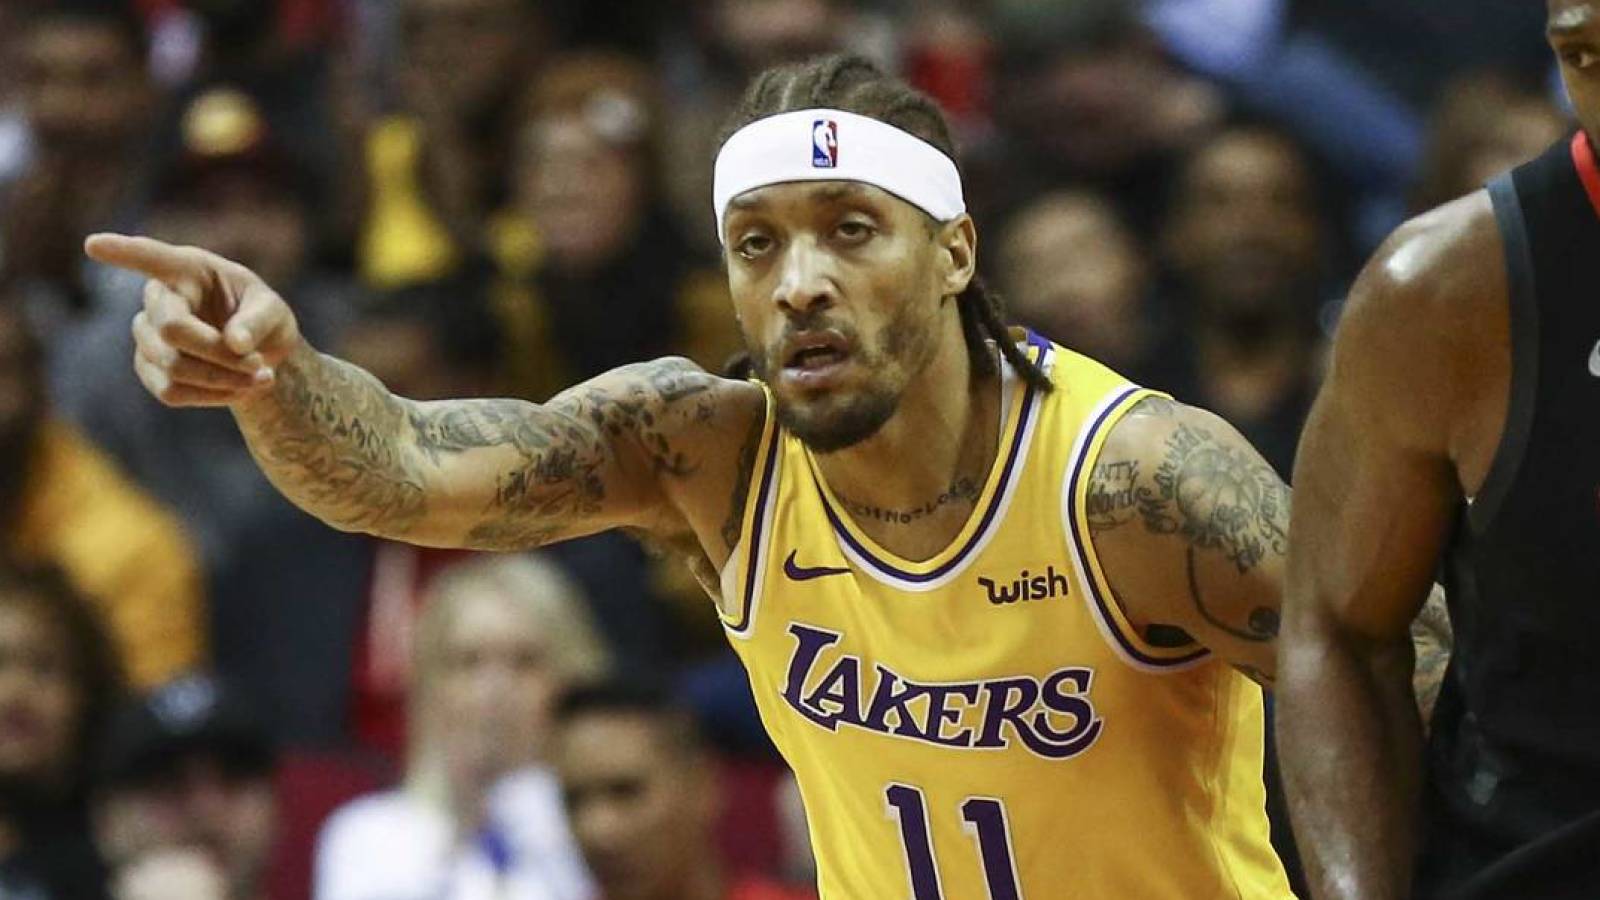 Michael Beasley on the corruption in college basketball